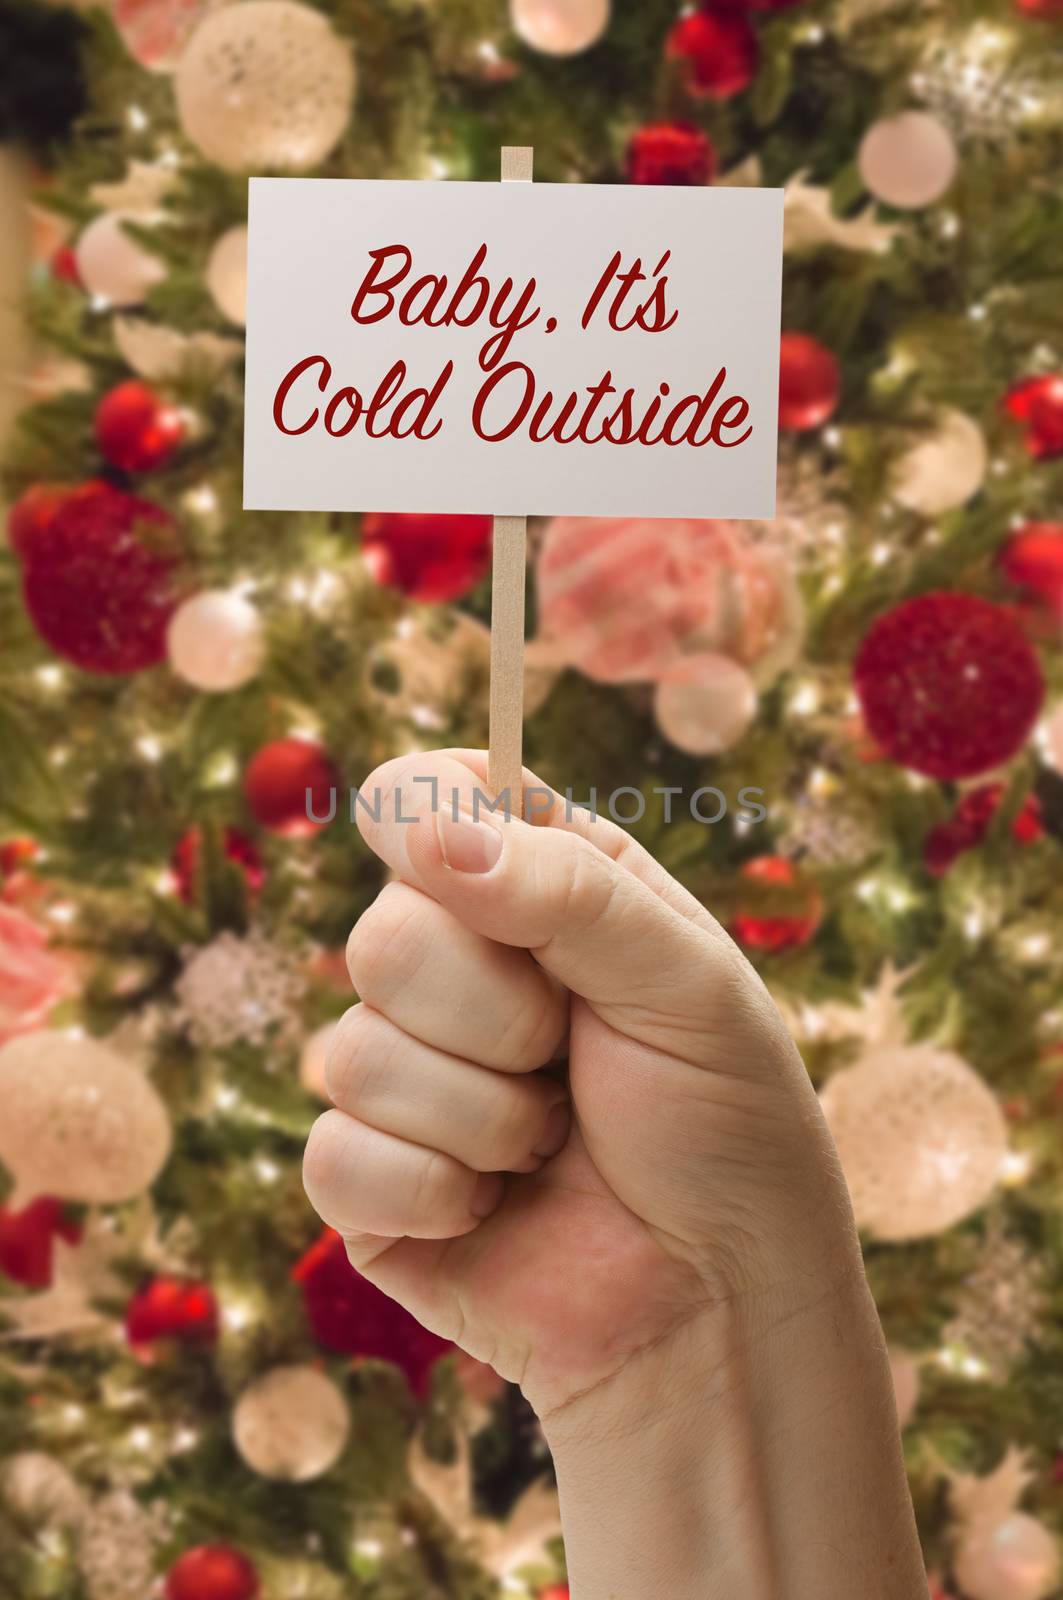 Hand Holding Baby, It's Cold Outside Card In Front of Decorated Christmas Tree.